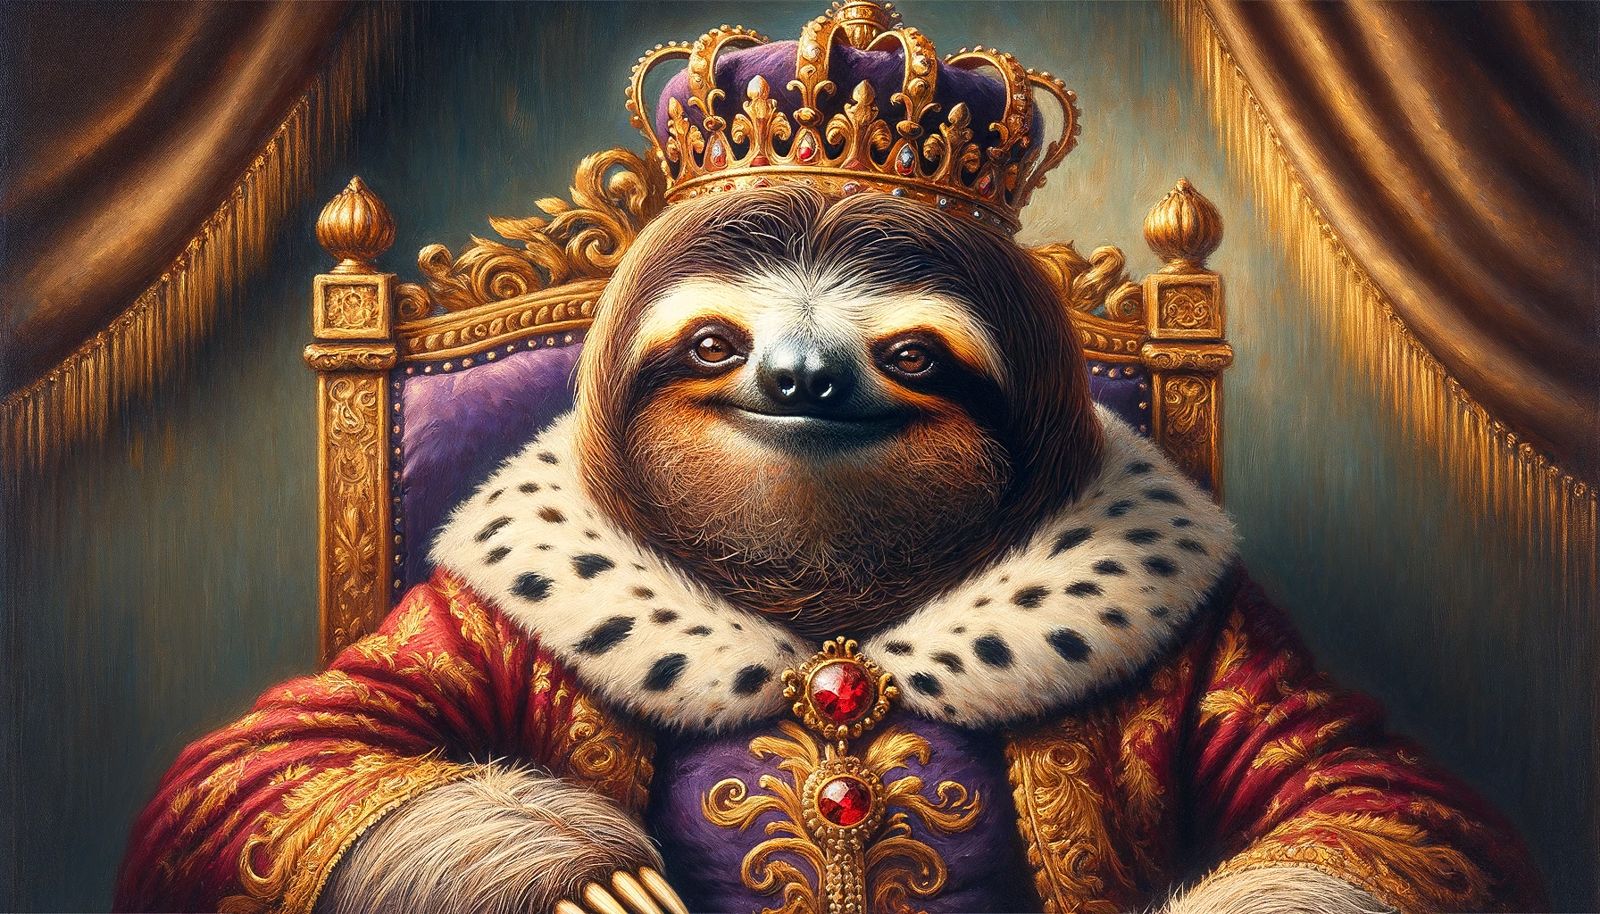 A sloth wearing a king's clothing